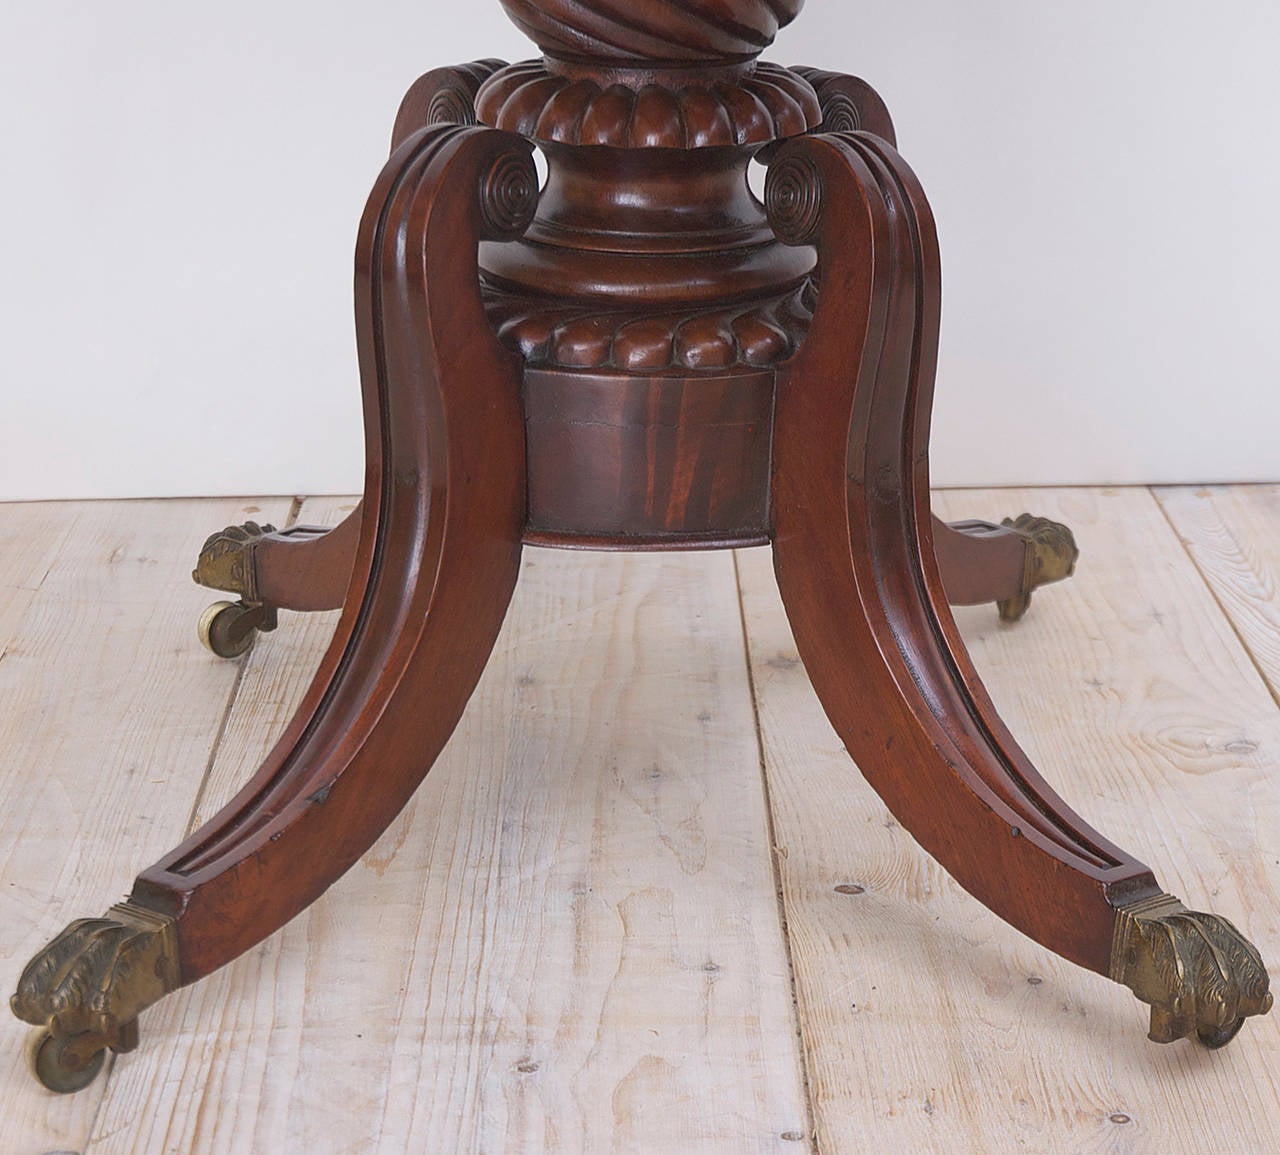 Early 19th Century American Federal Side Table in Mahogany, Boston circa 1815